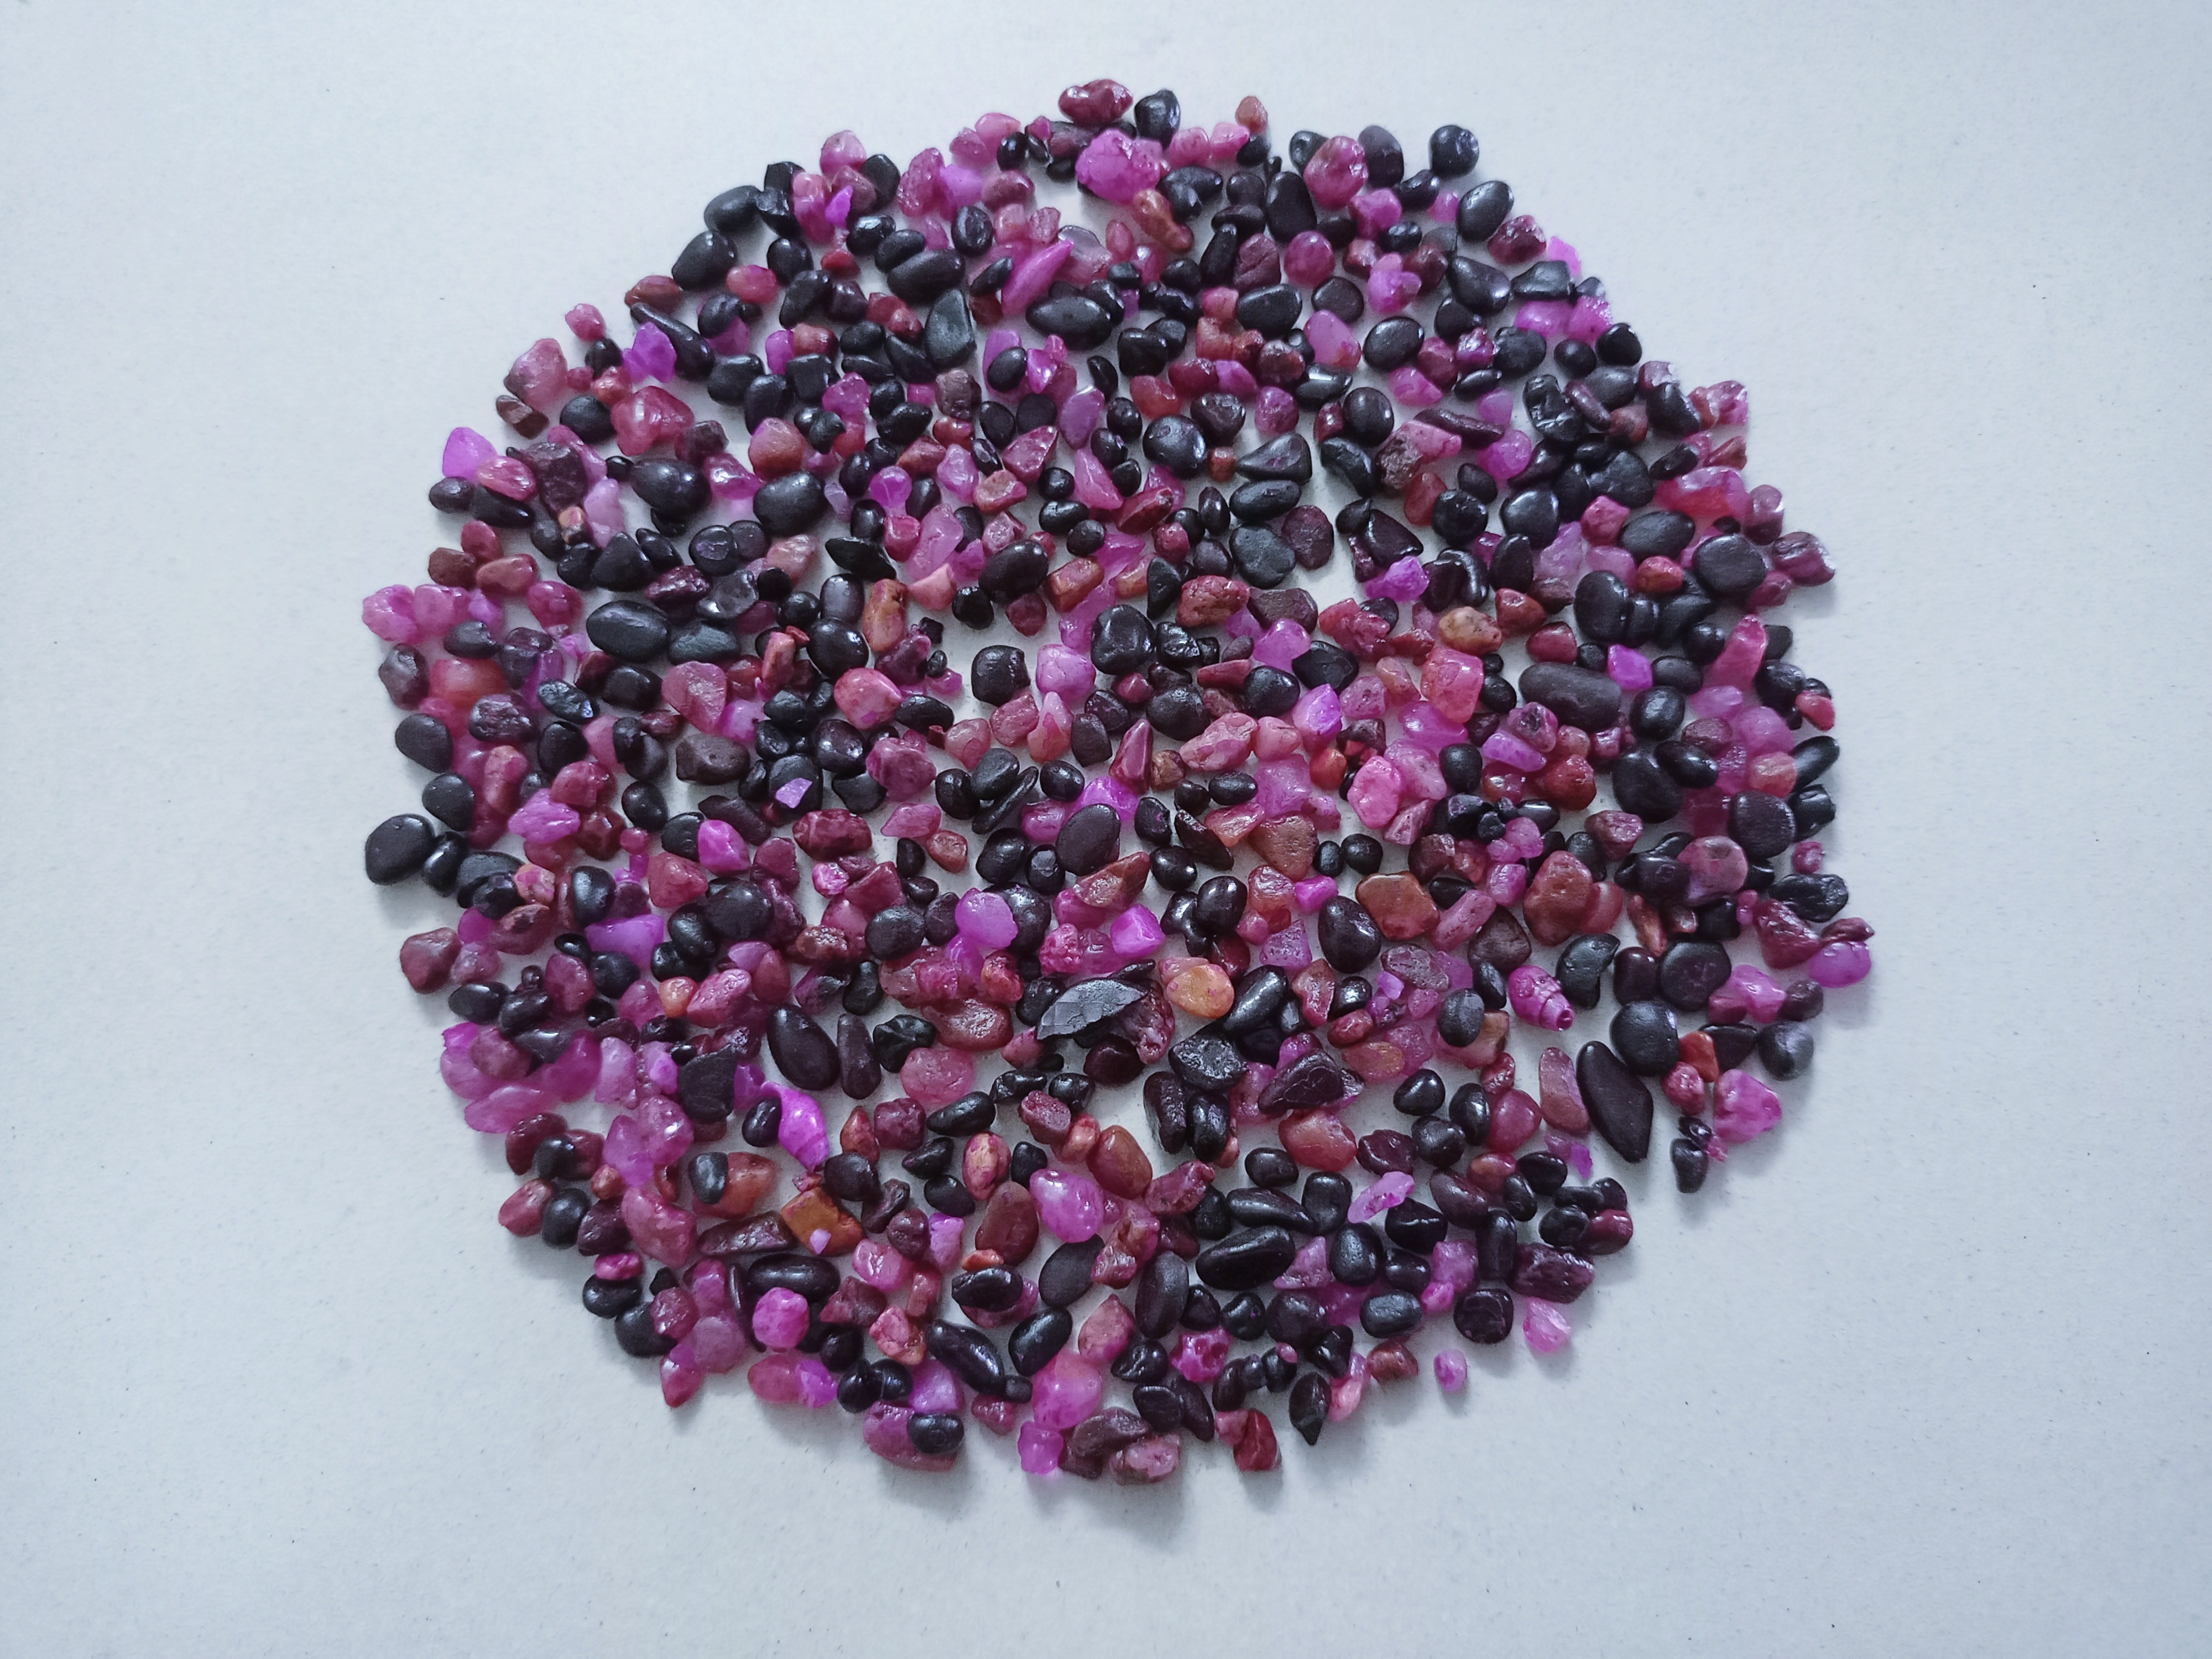 round smooth gravels color coated 10 colour sand and stone pebbles and cobbles polished gravels